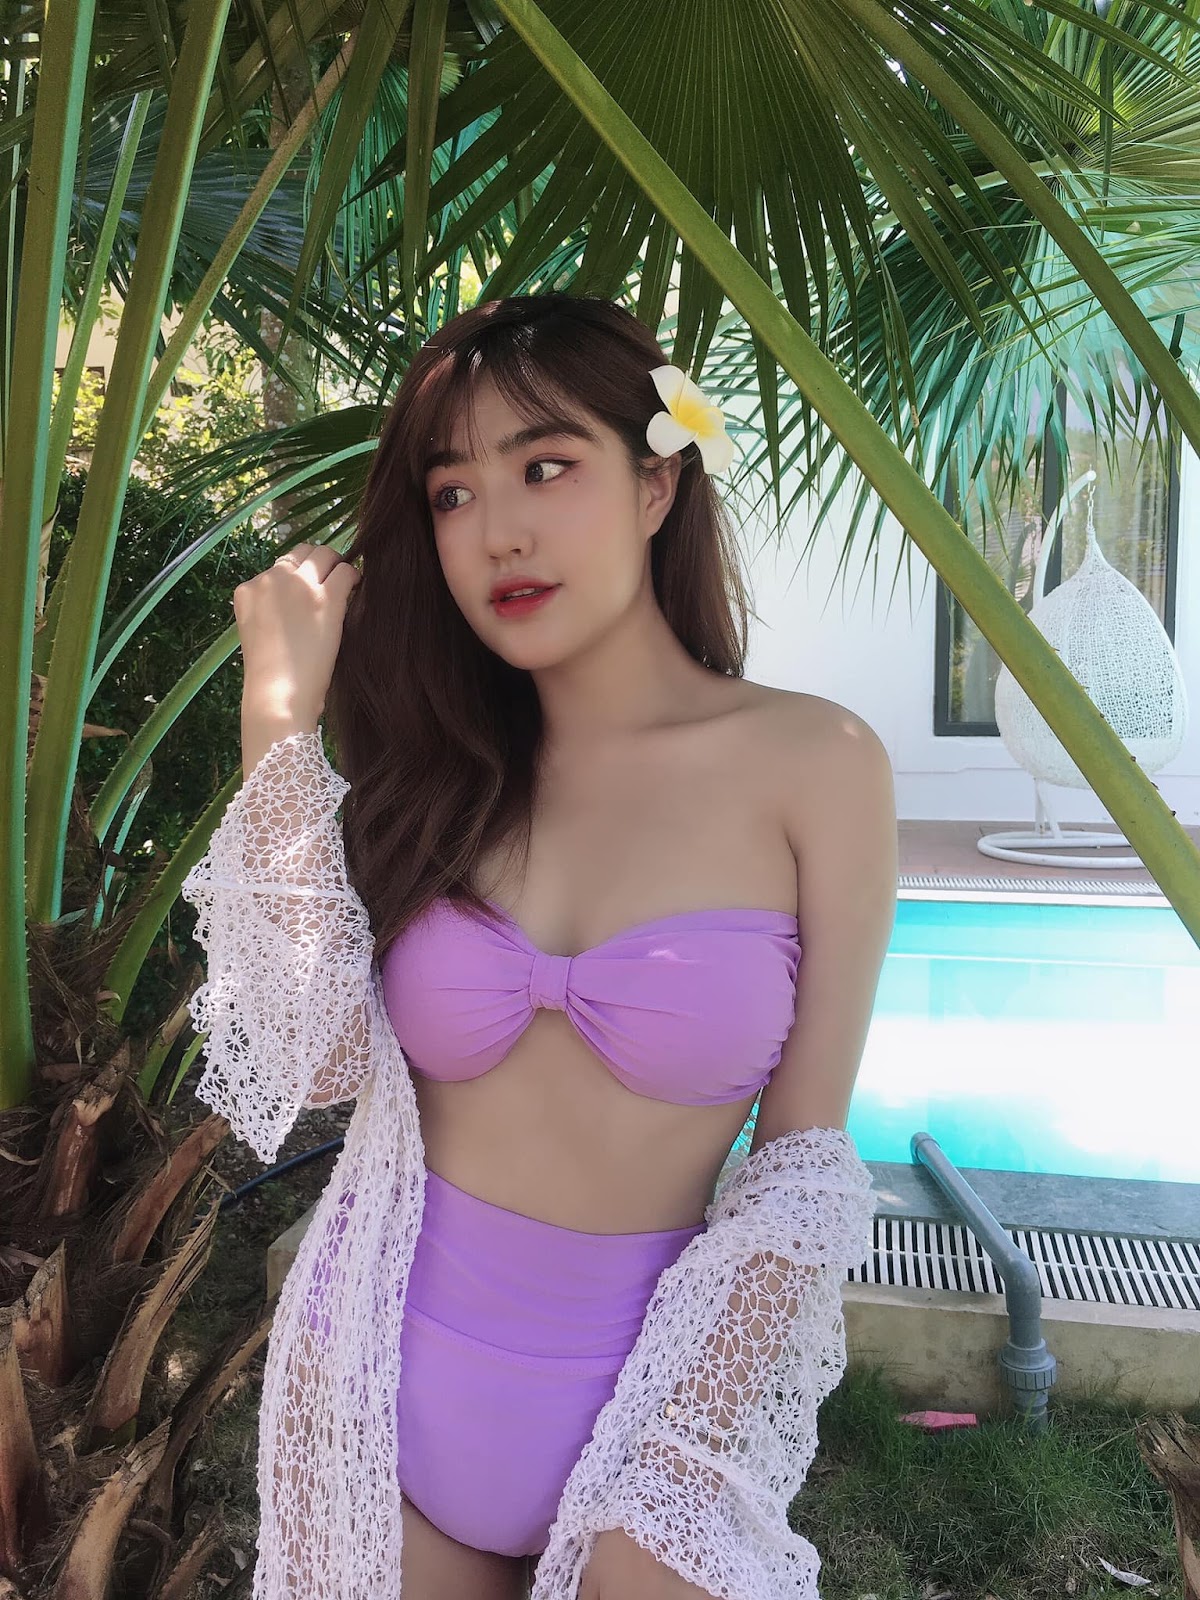 It's been a long time since she wore a bikini, female streamer Thao Anh still makes people teary-eyed with her curvaceous body - Photo 6.